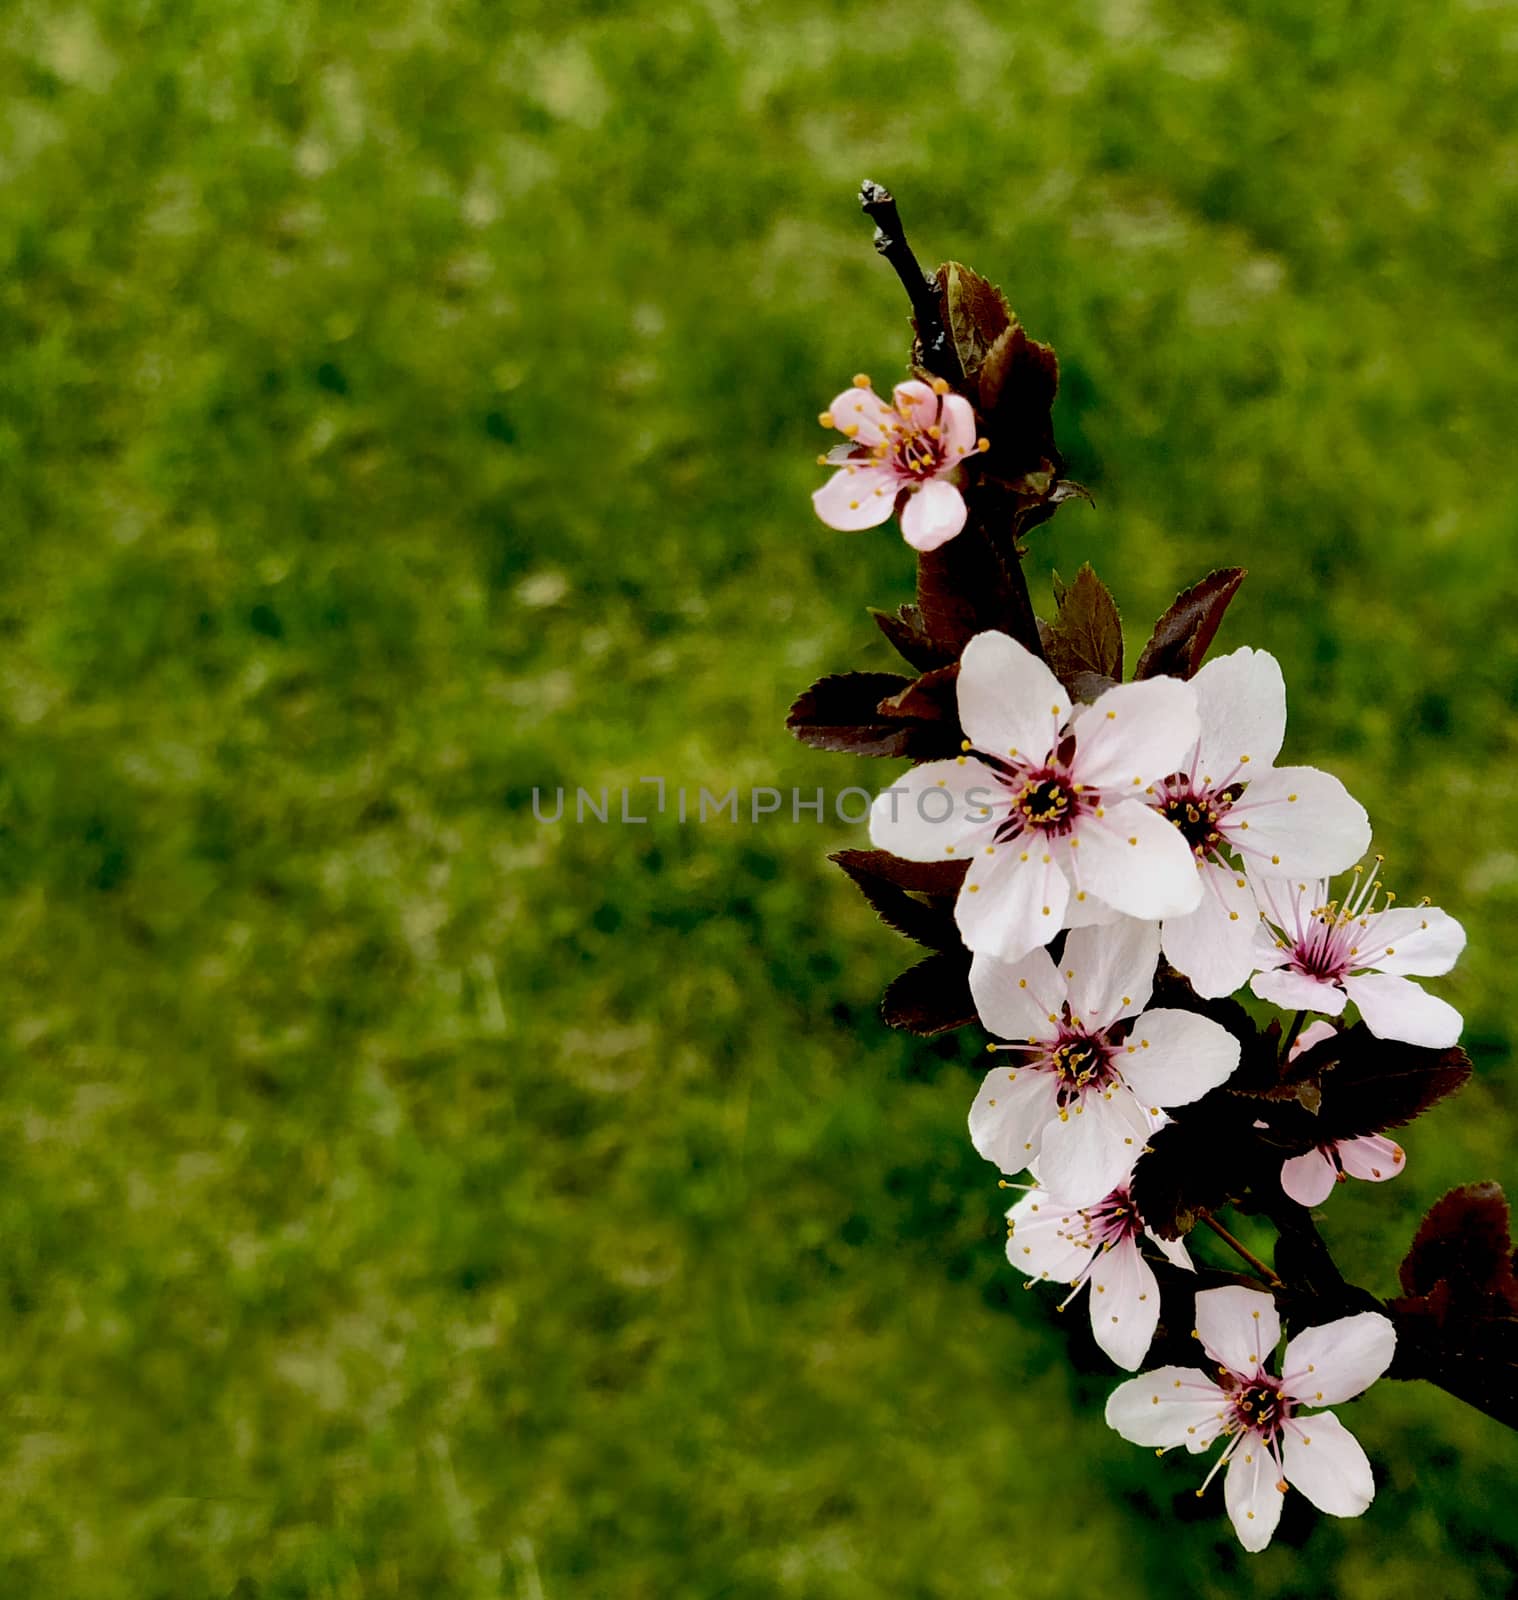 pinlk blossom peach blooming in the spring on grass by F1b0nacci